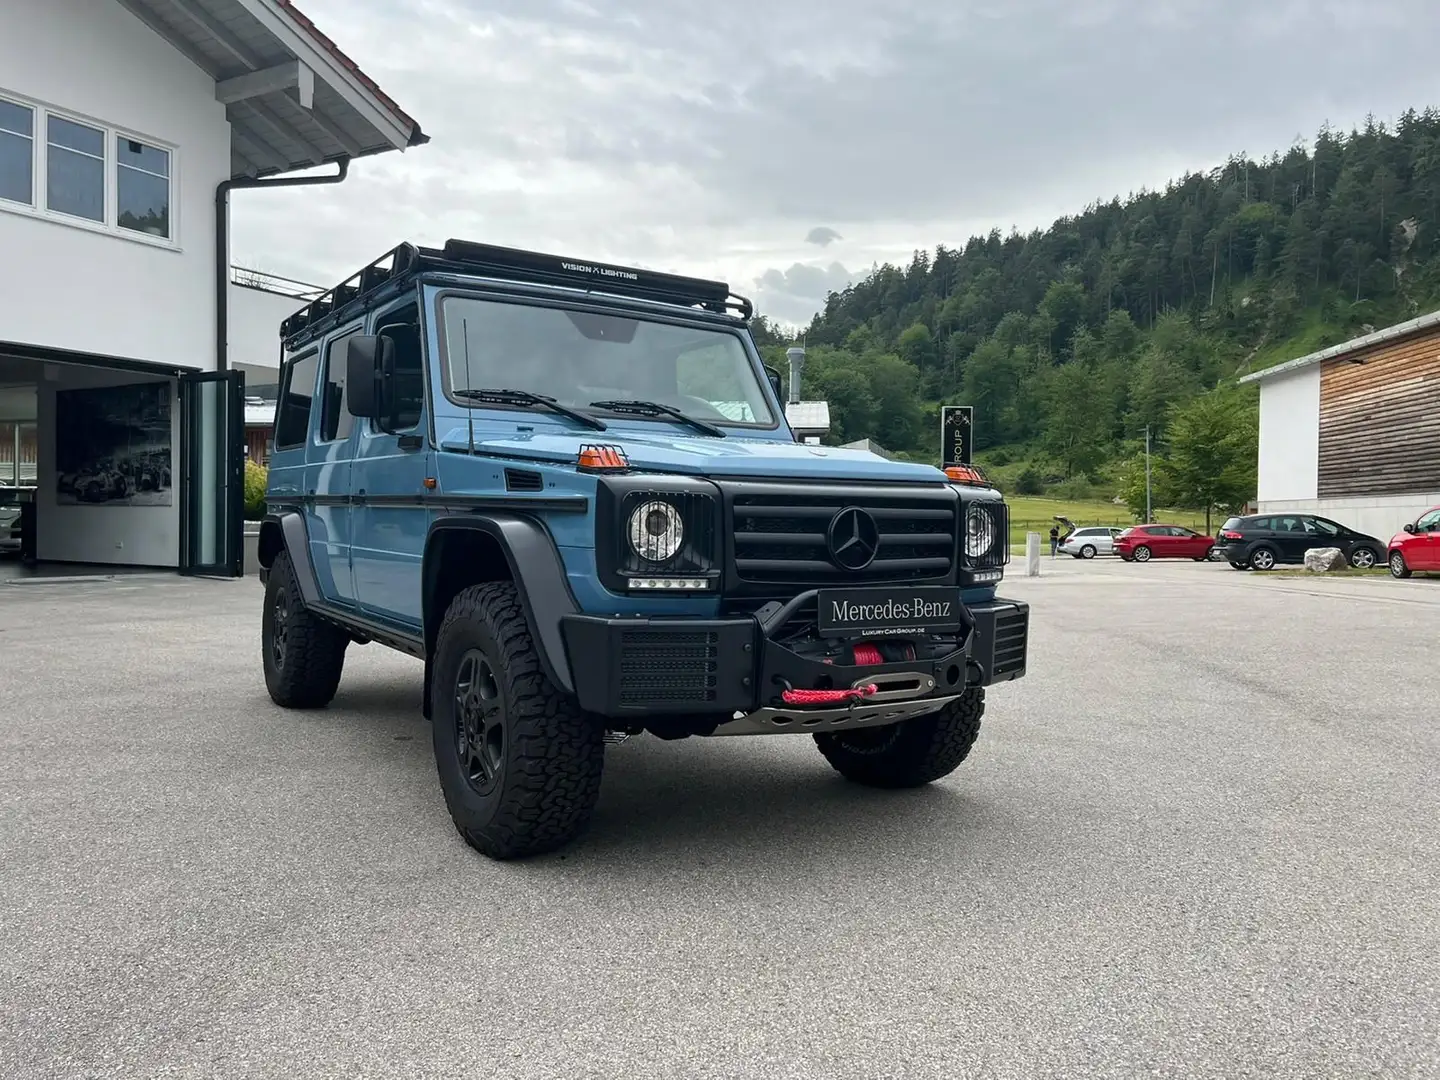 Mercedes-Benz G 350 Professional  LIMITED  EDITION 1 of 5 worldwide plava - 2